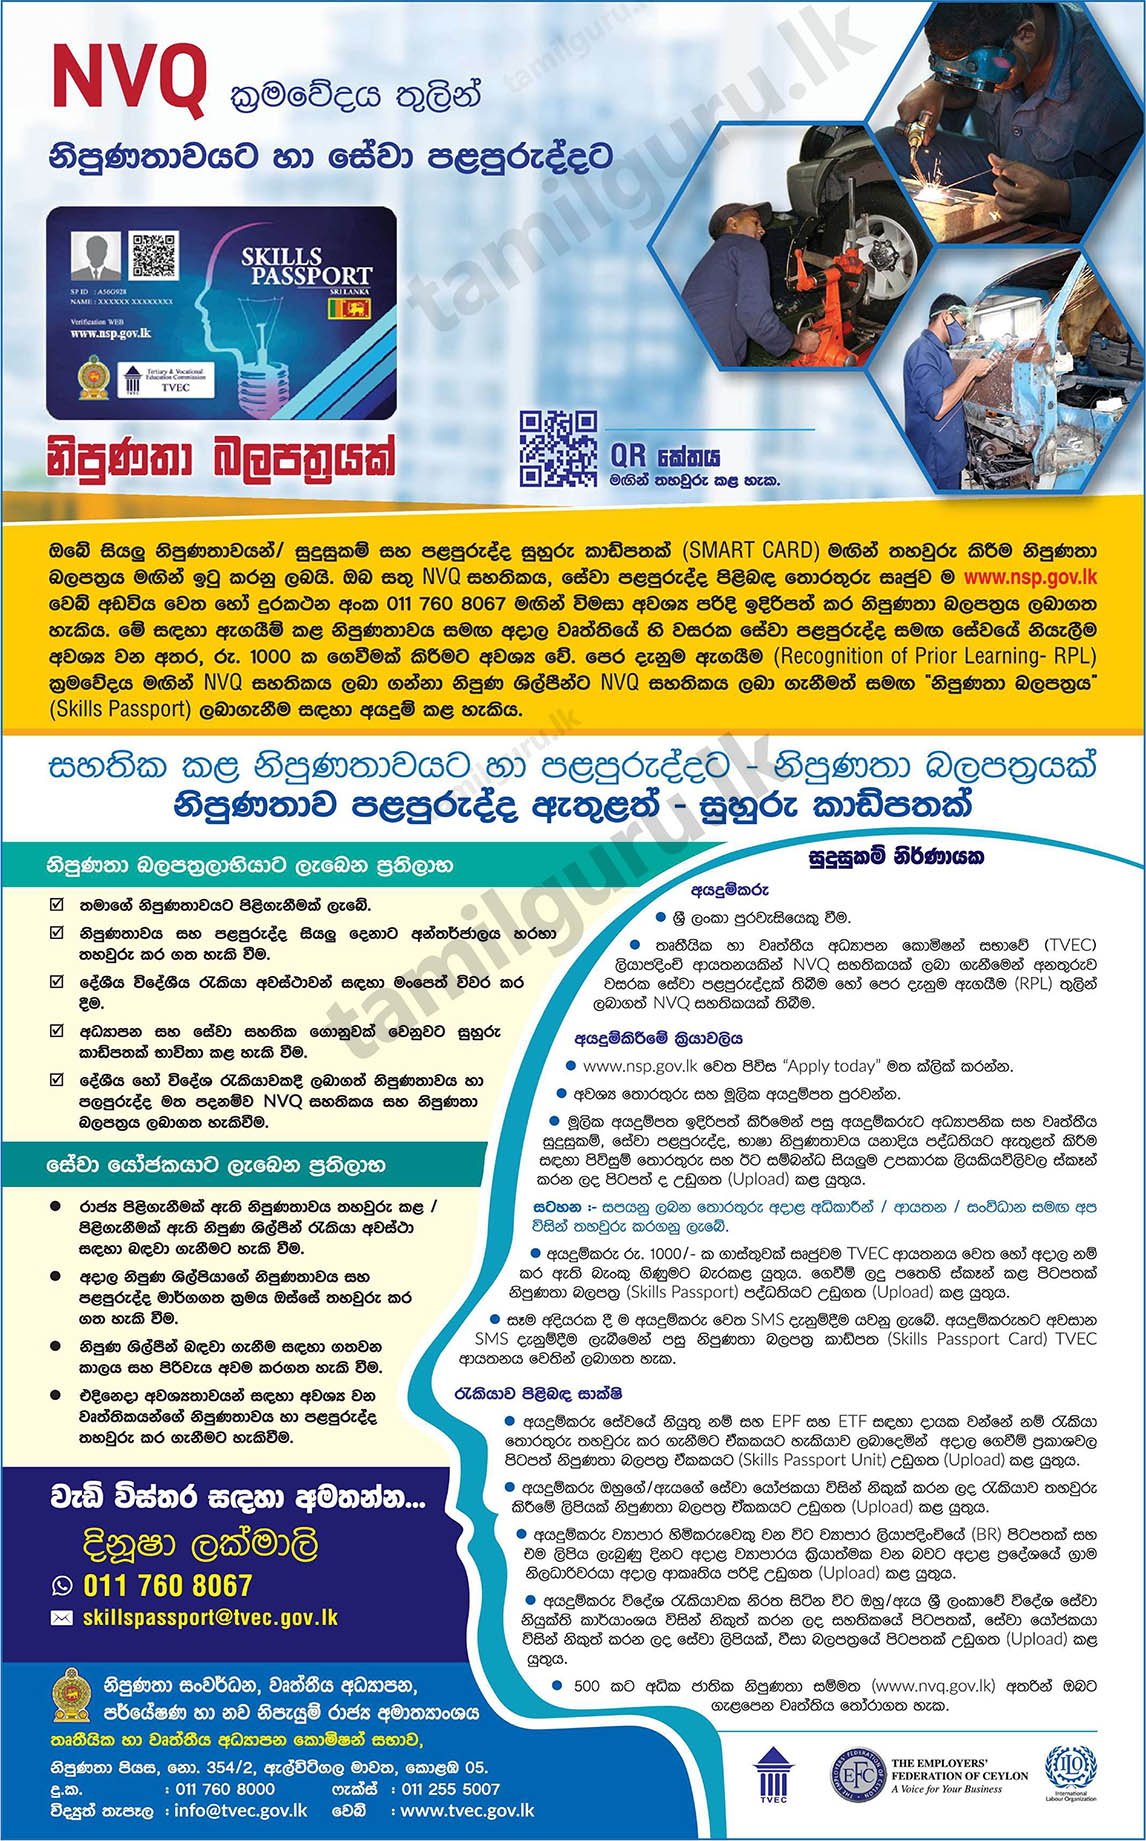 Skills Passport for migrant workers or workers in Sri Lanka who have NVQ Qualifications - Full Details in Sinhala